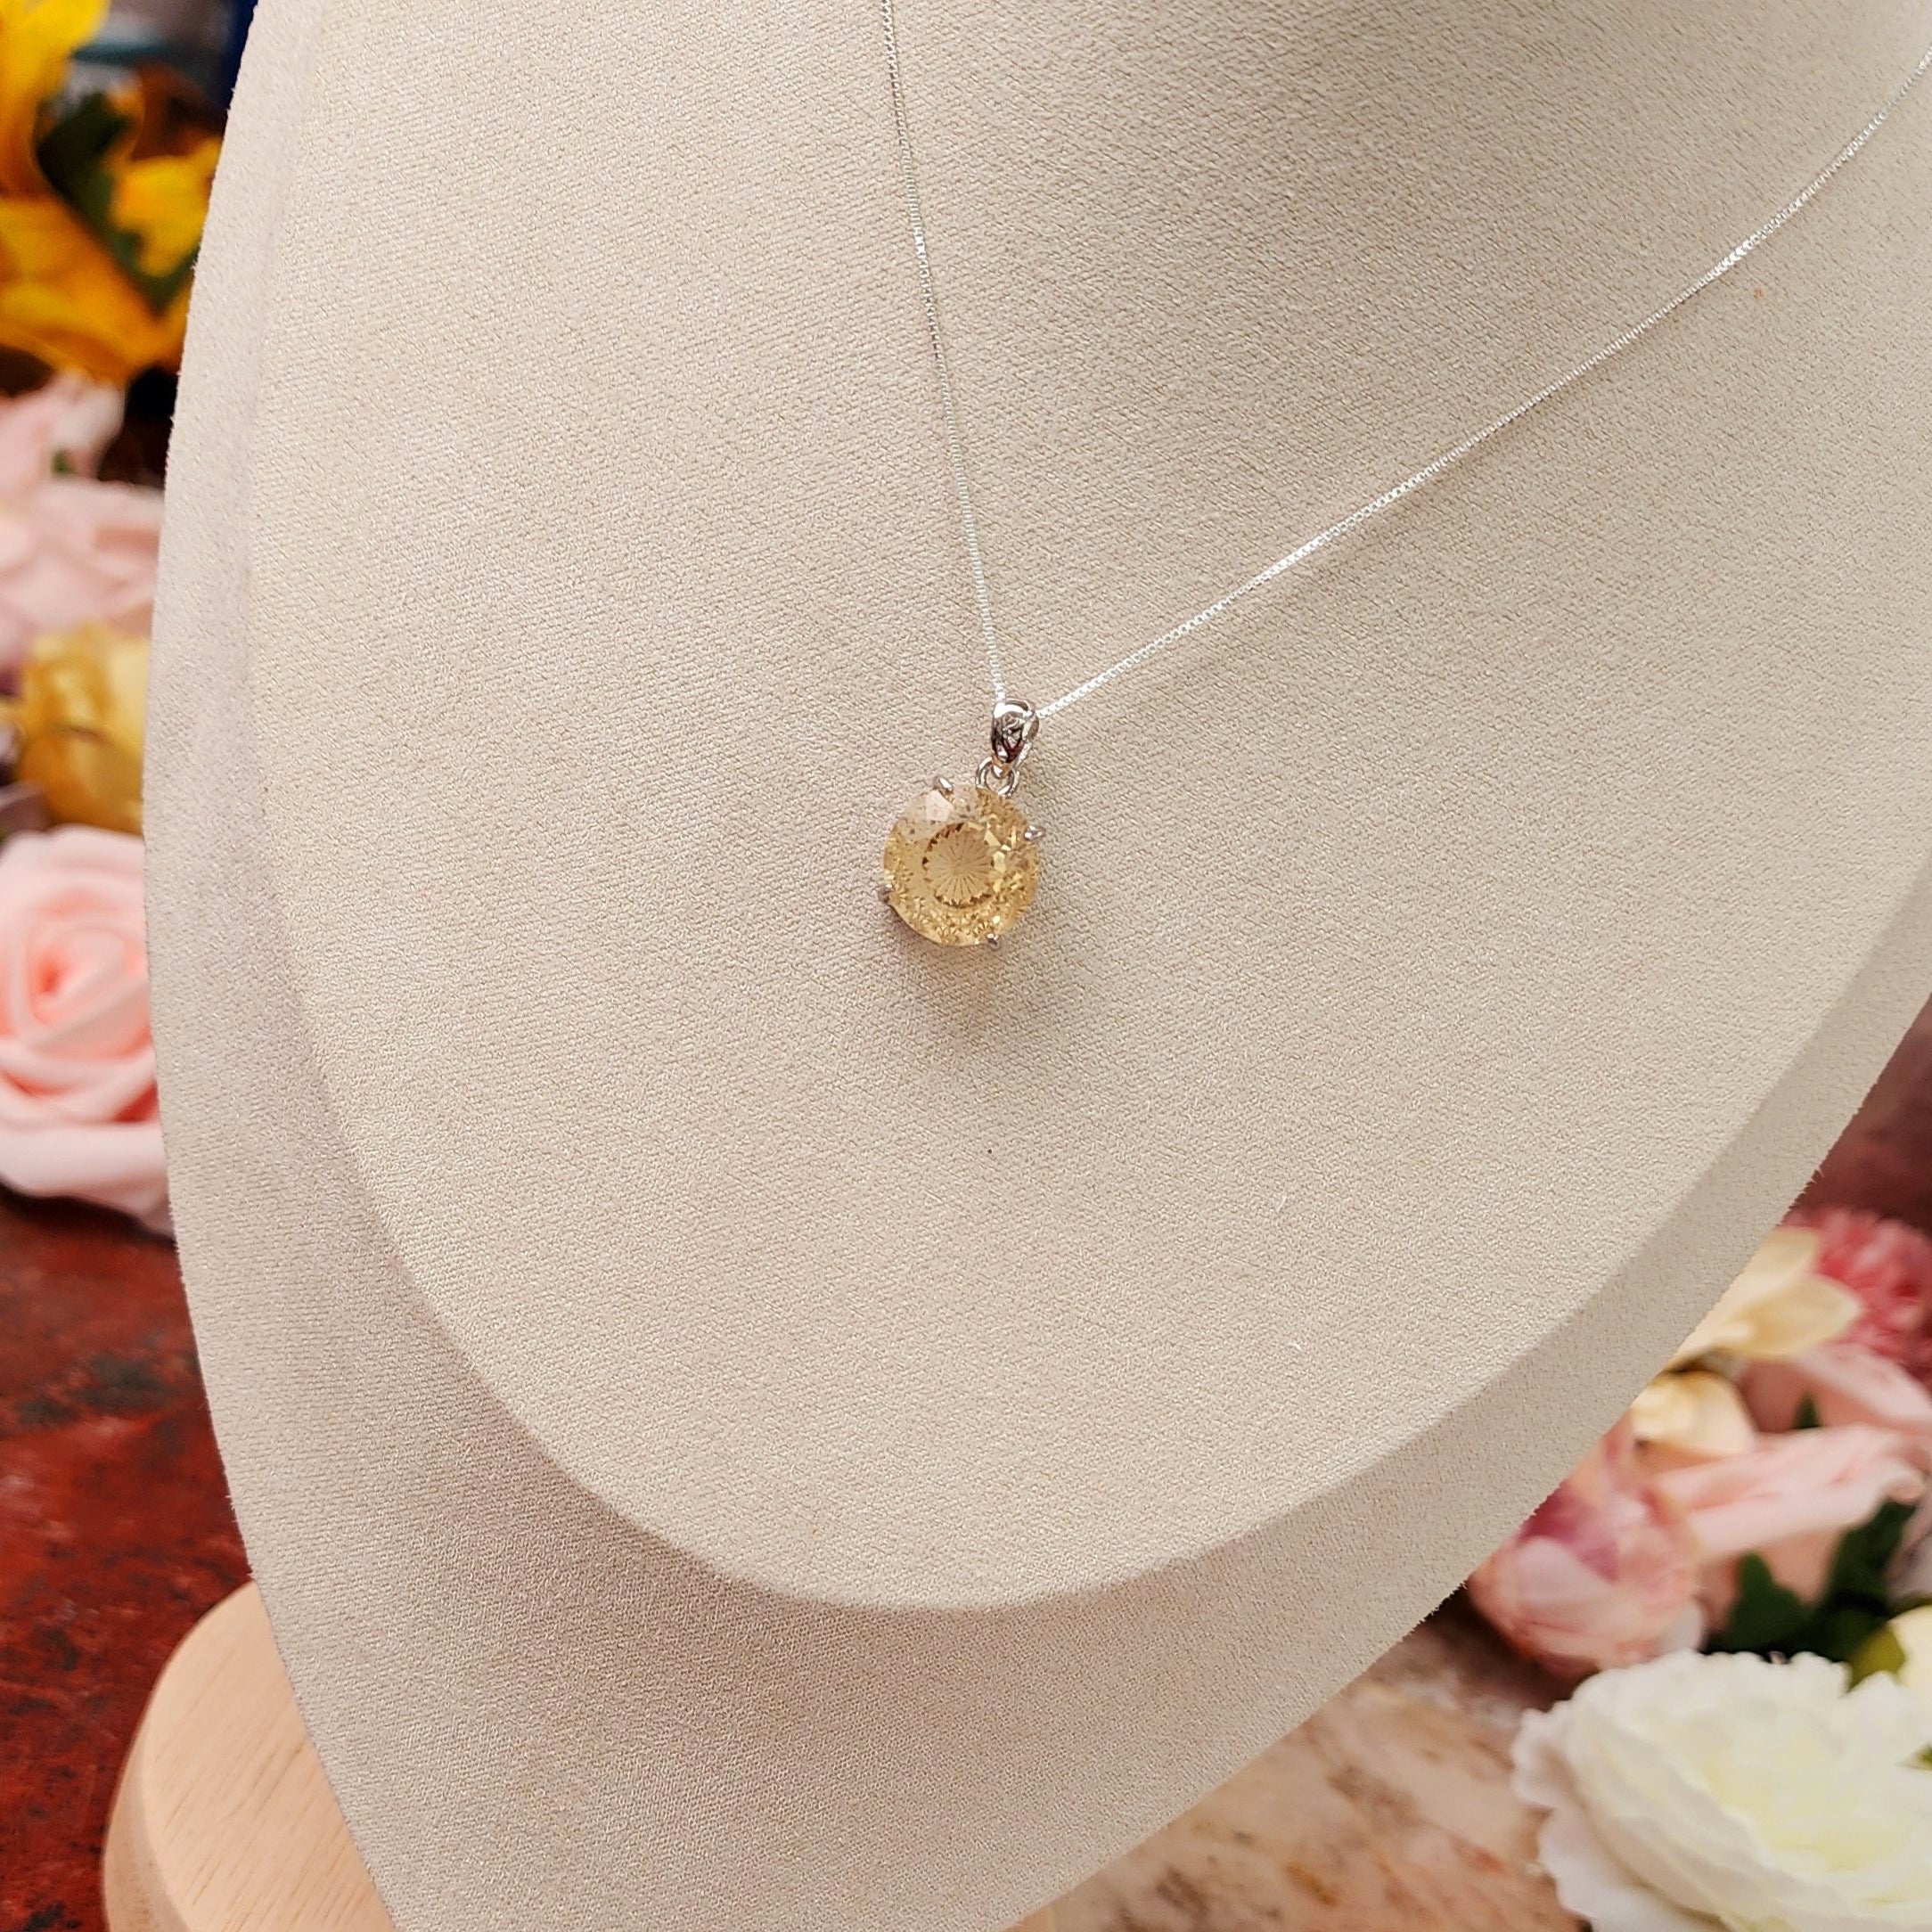 Citrine Carved Necklace for Attracting Abundance and Positivity